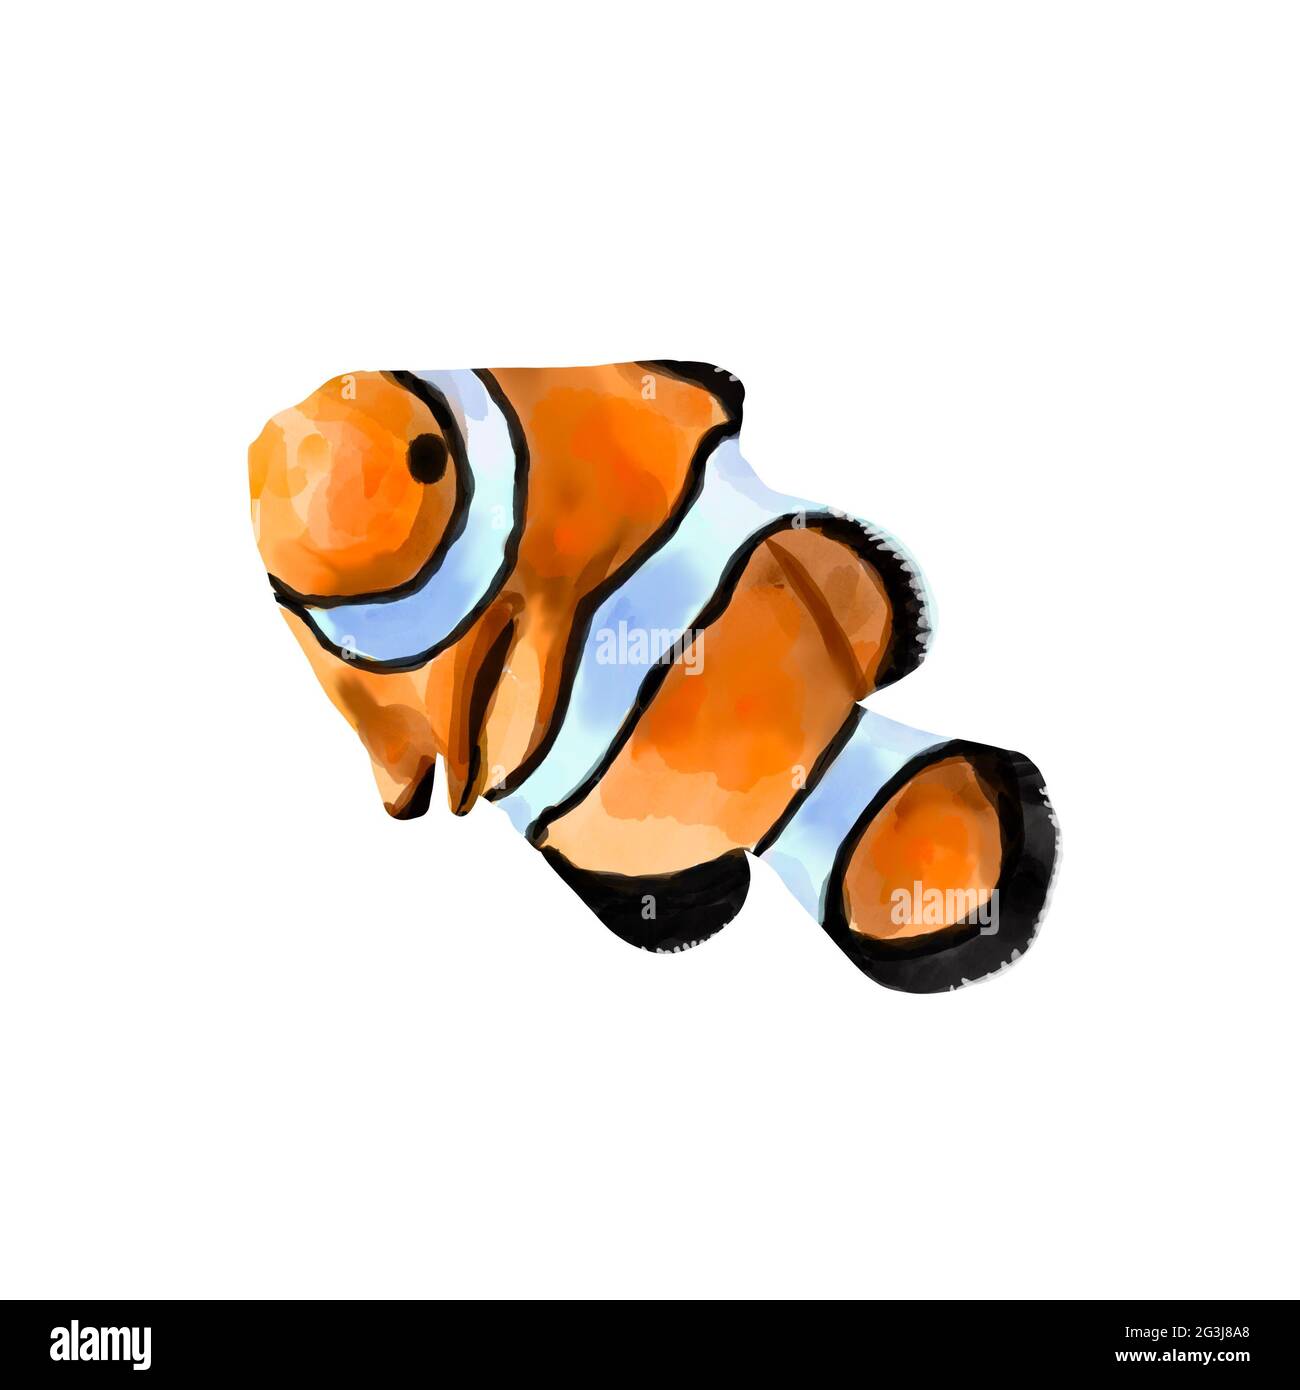 Watercolor illustration of an orange clown fish. Salt water exotic amphiprion fish isolated on white background. Stock Photo